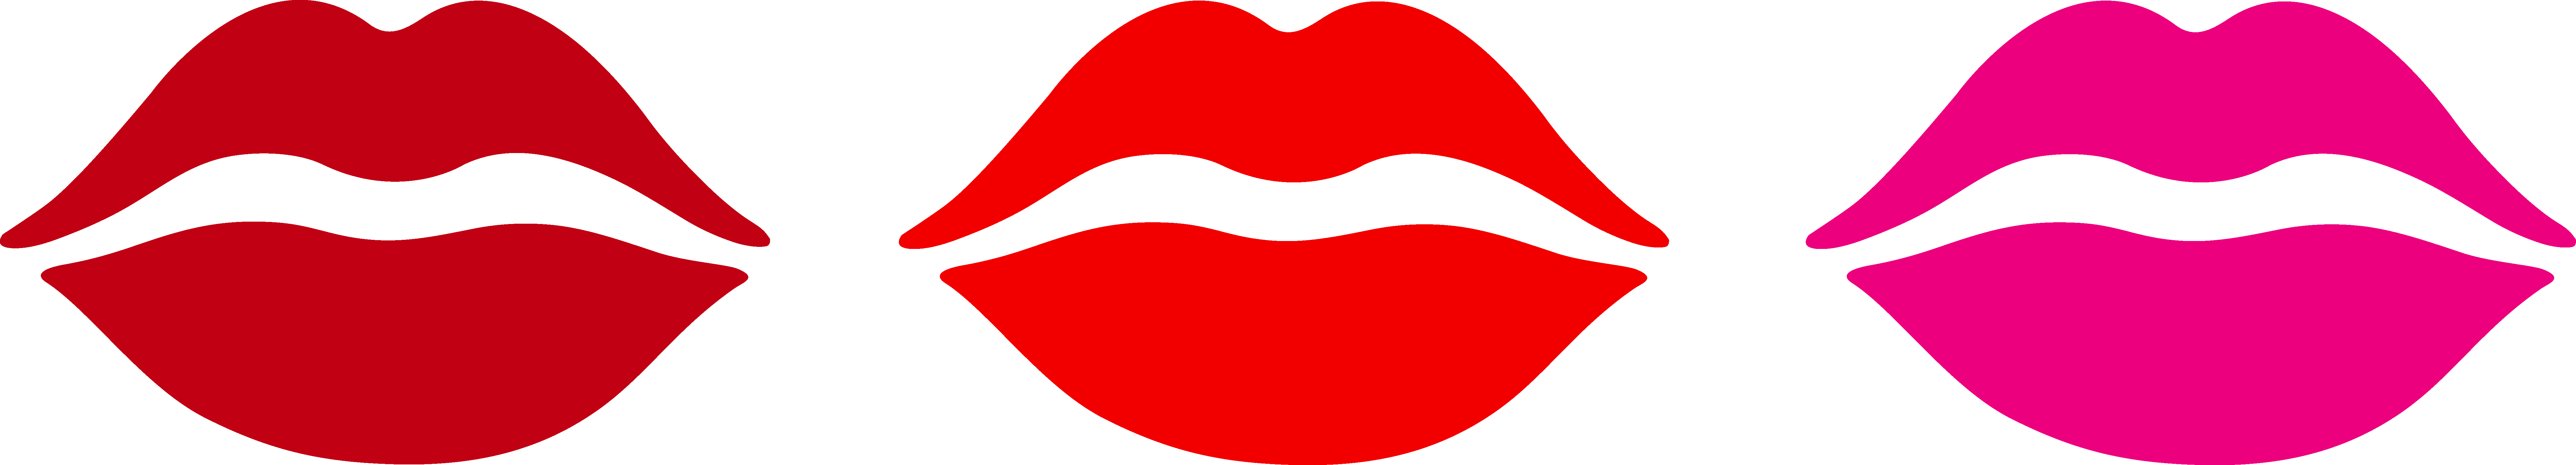 Free Kissing Lips Clipart, Download Free Clip Art, Free Clip